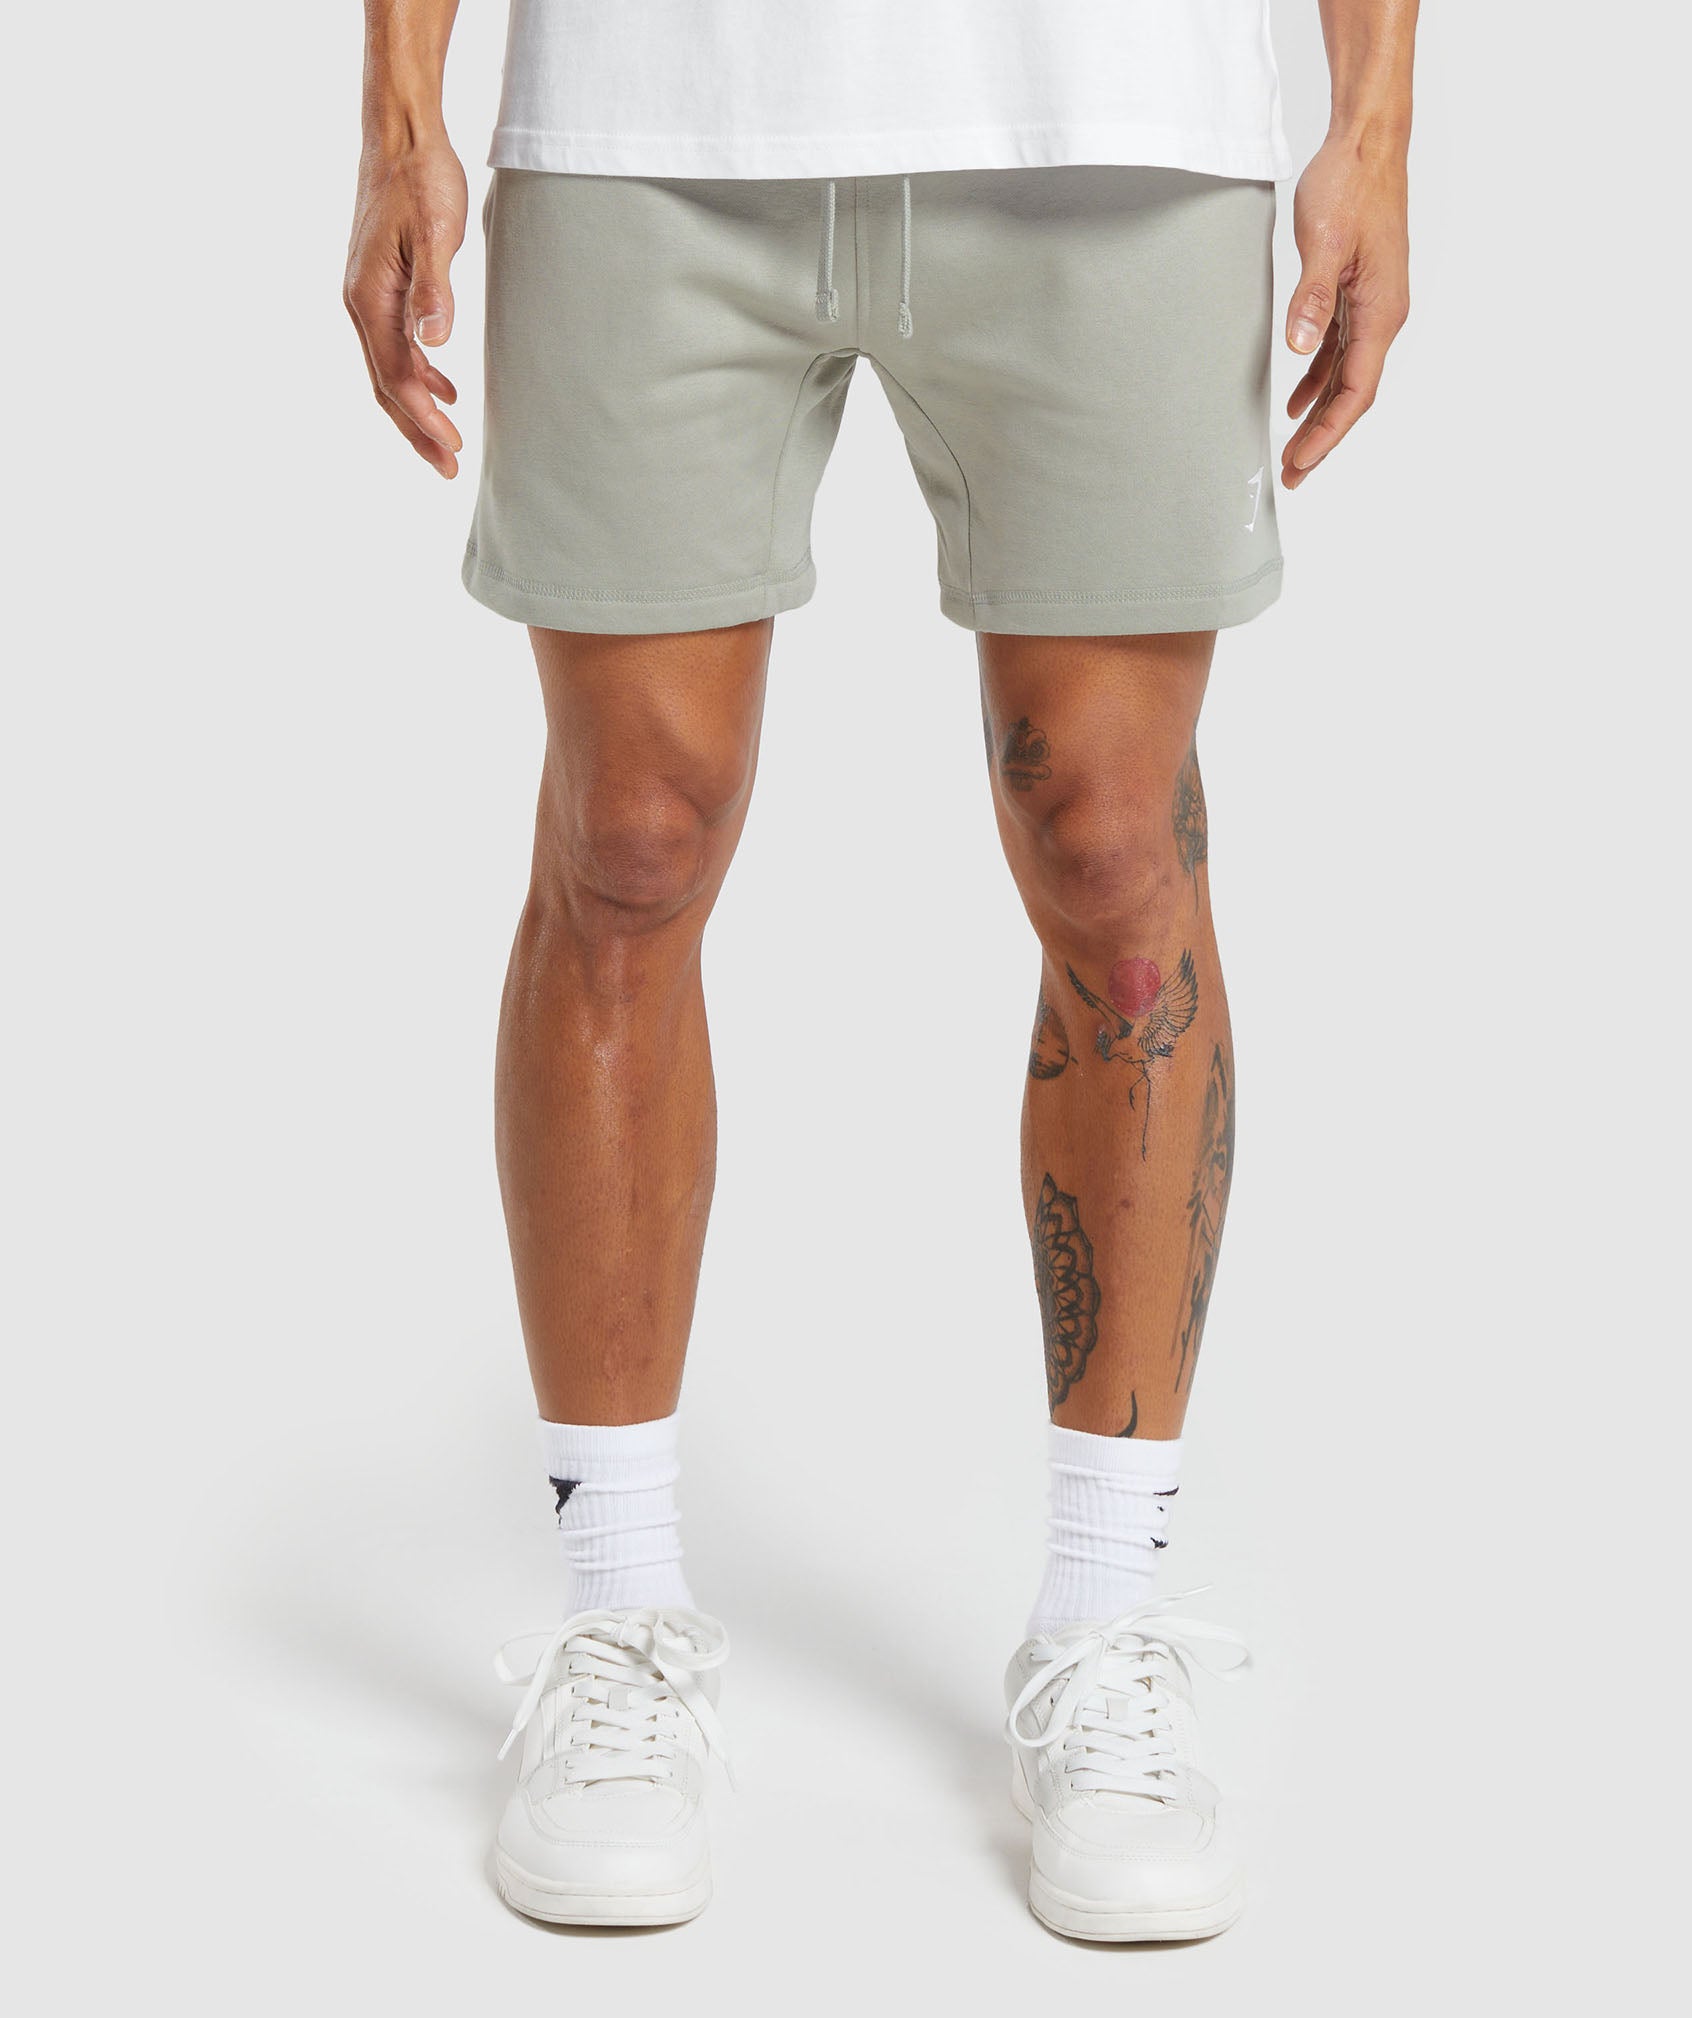 Crest 7" Shorts in Stone Grey - view 1